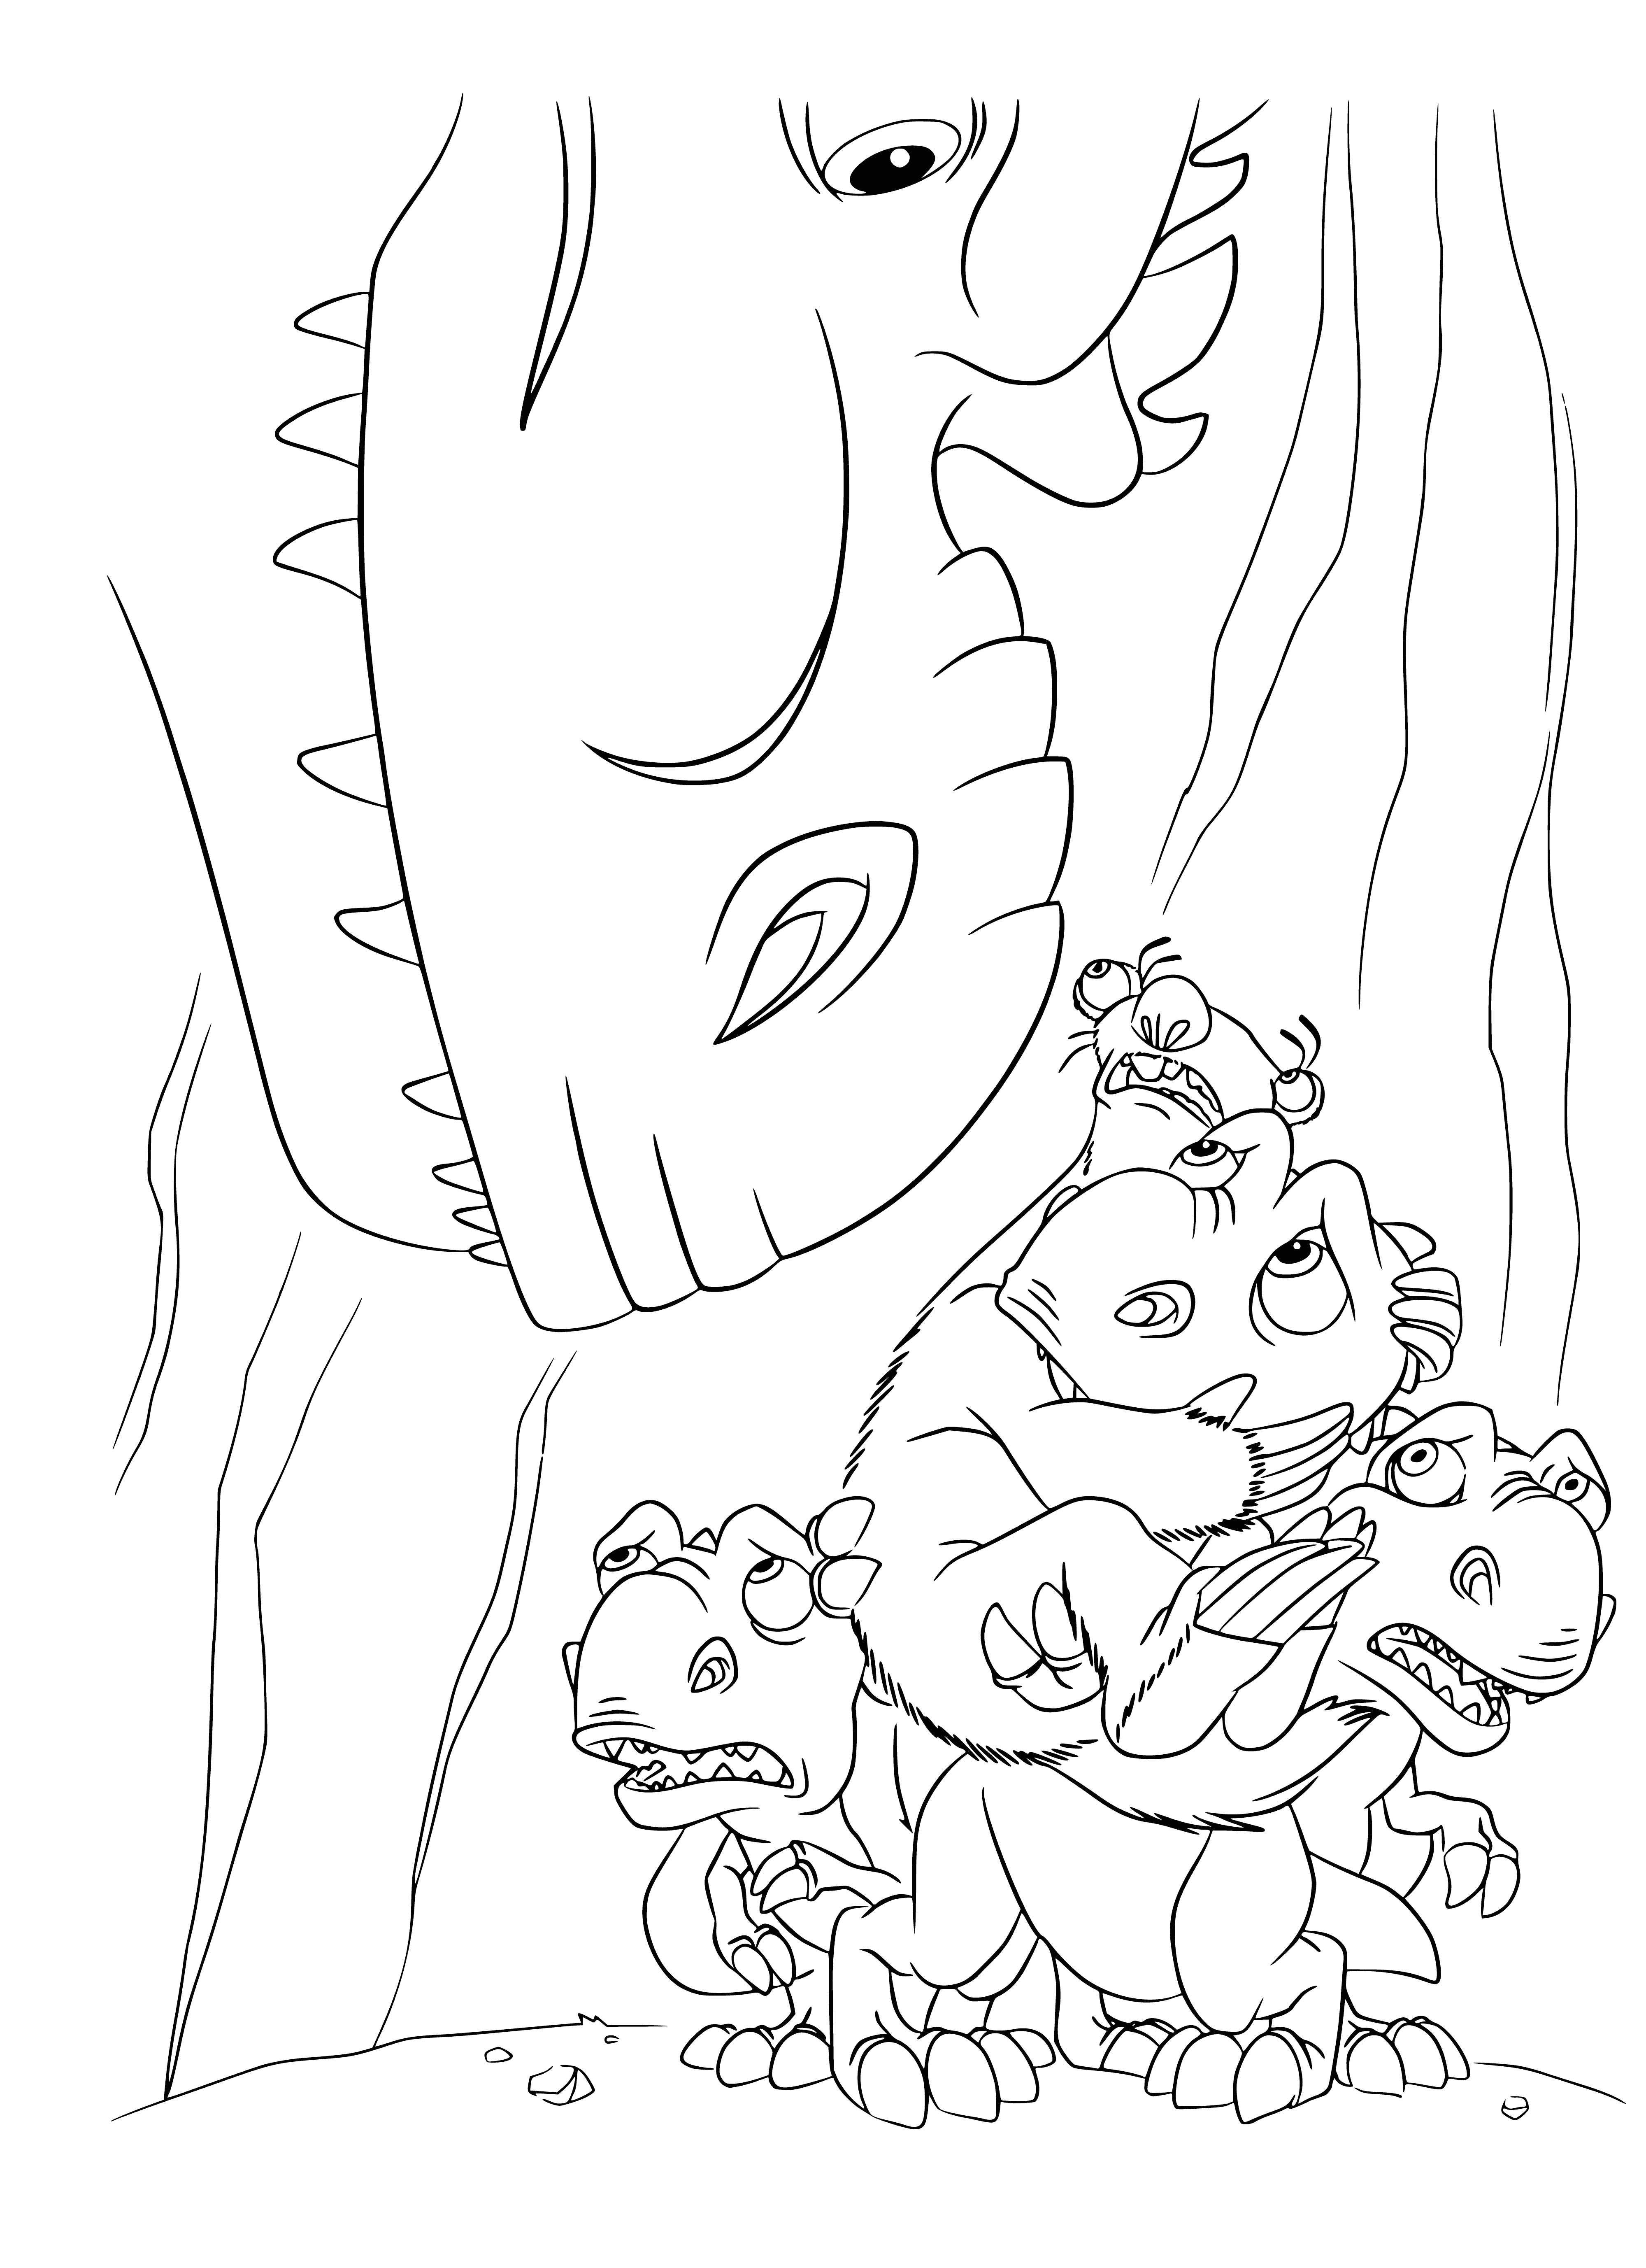 coloring page: Two dinosaurs stand in snowy landscape: a large green one and a smaller purple one facing it. Green has a long neck & tail, purple has a shorter neck & tail.